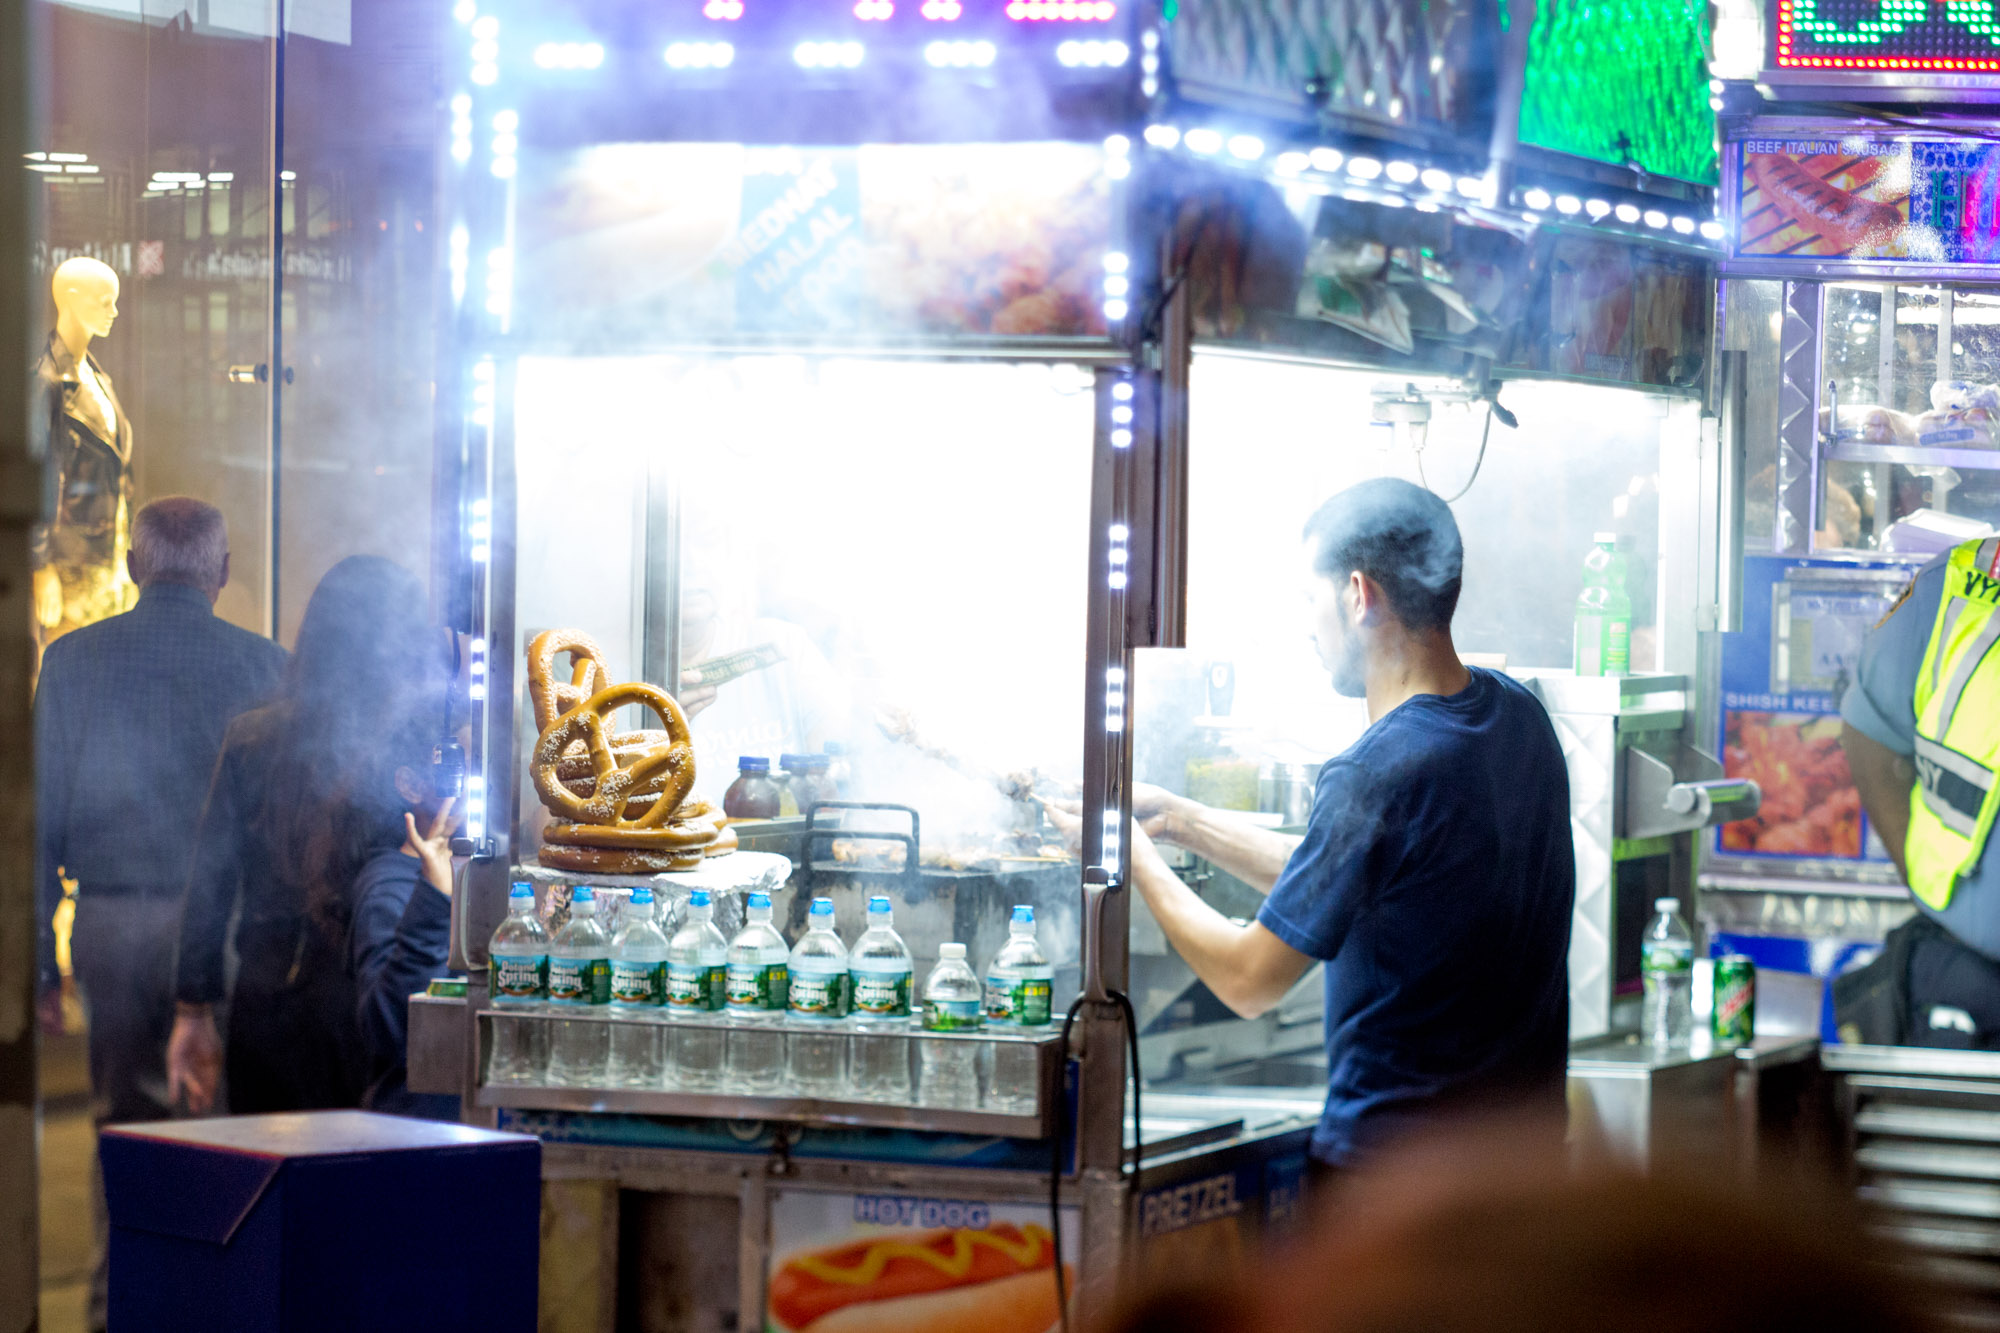 A food cart in New York city filled with smoke